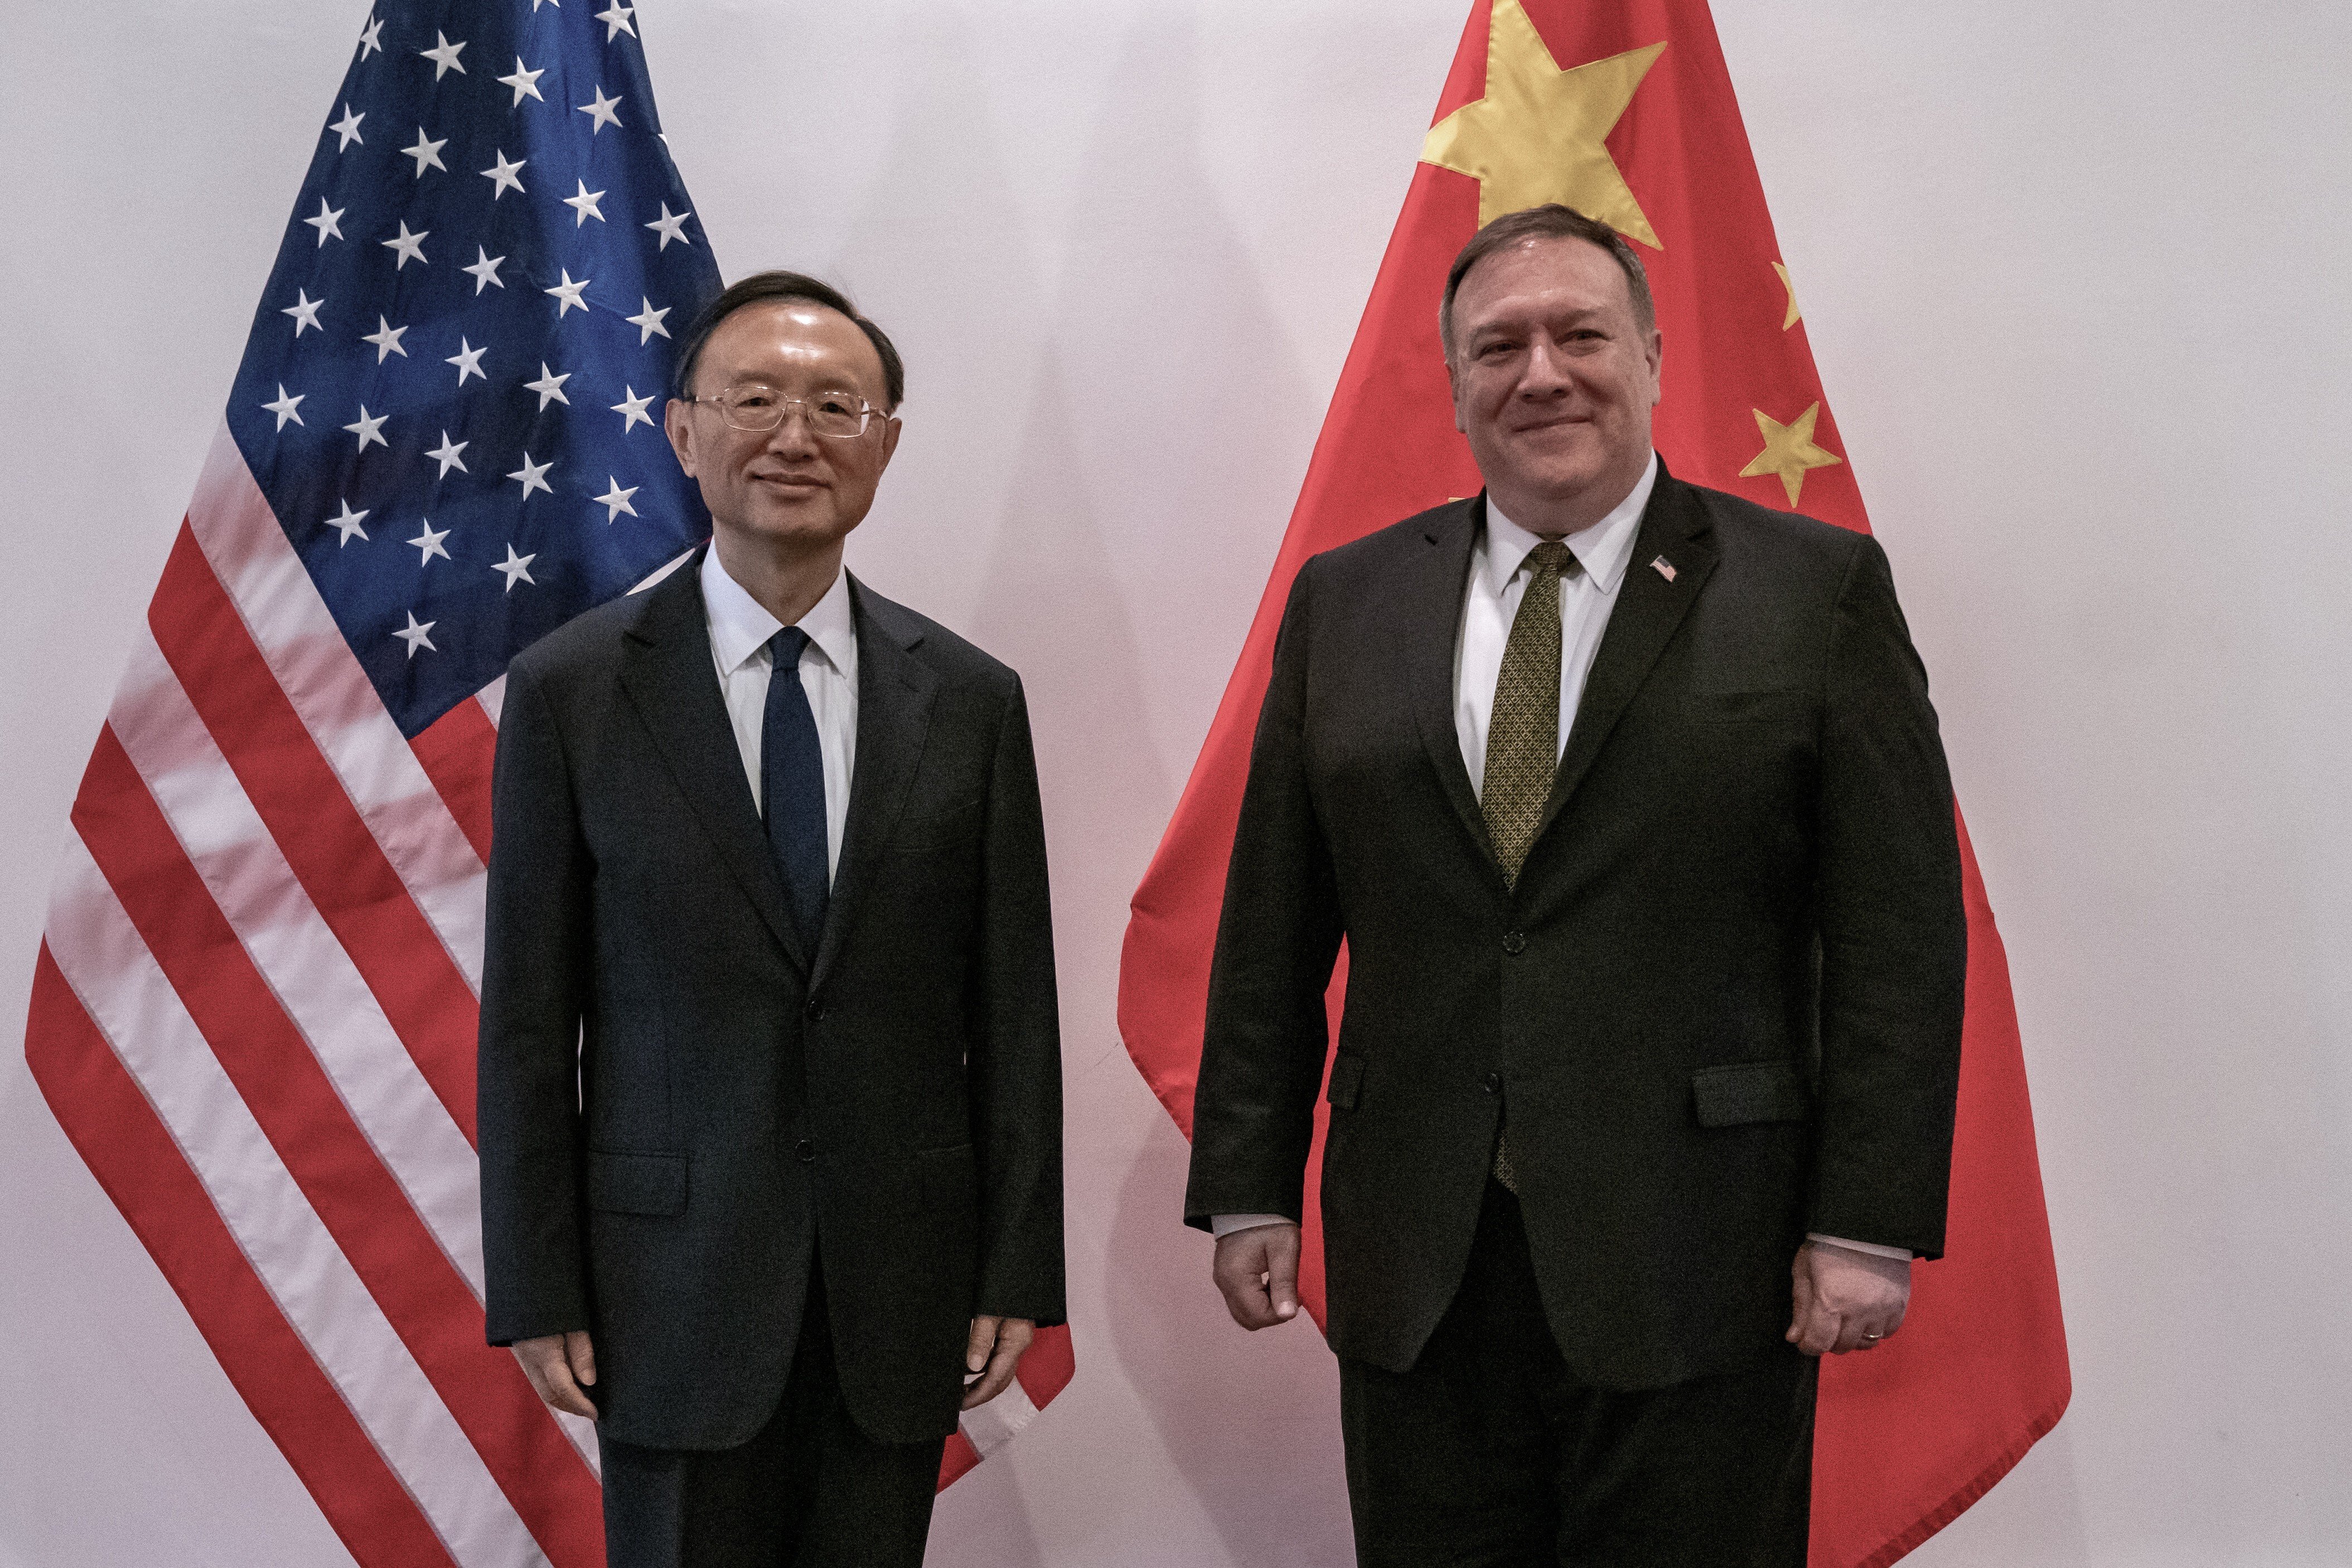 Yang Jiechi, director of China’s Central Foreign Affairs Commission Office, and US Secretary of State Mike Pompeo meet in Honolulu on June 17. Photo: US Department of State / DPA